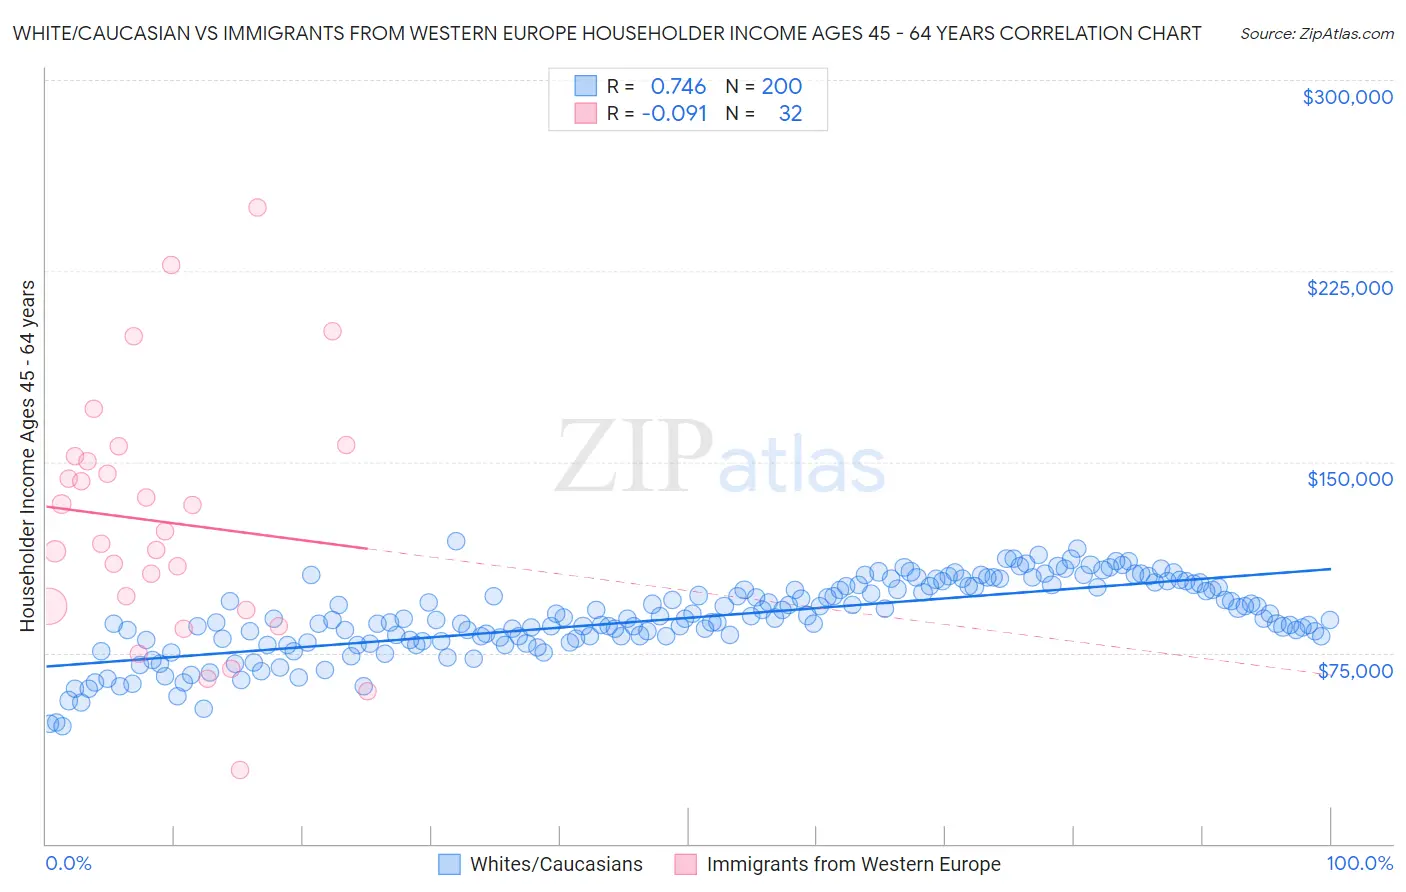 White/Caucasian vs Immigrants from Western Europe Householder Income Ages 45 - 64 years